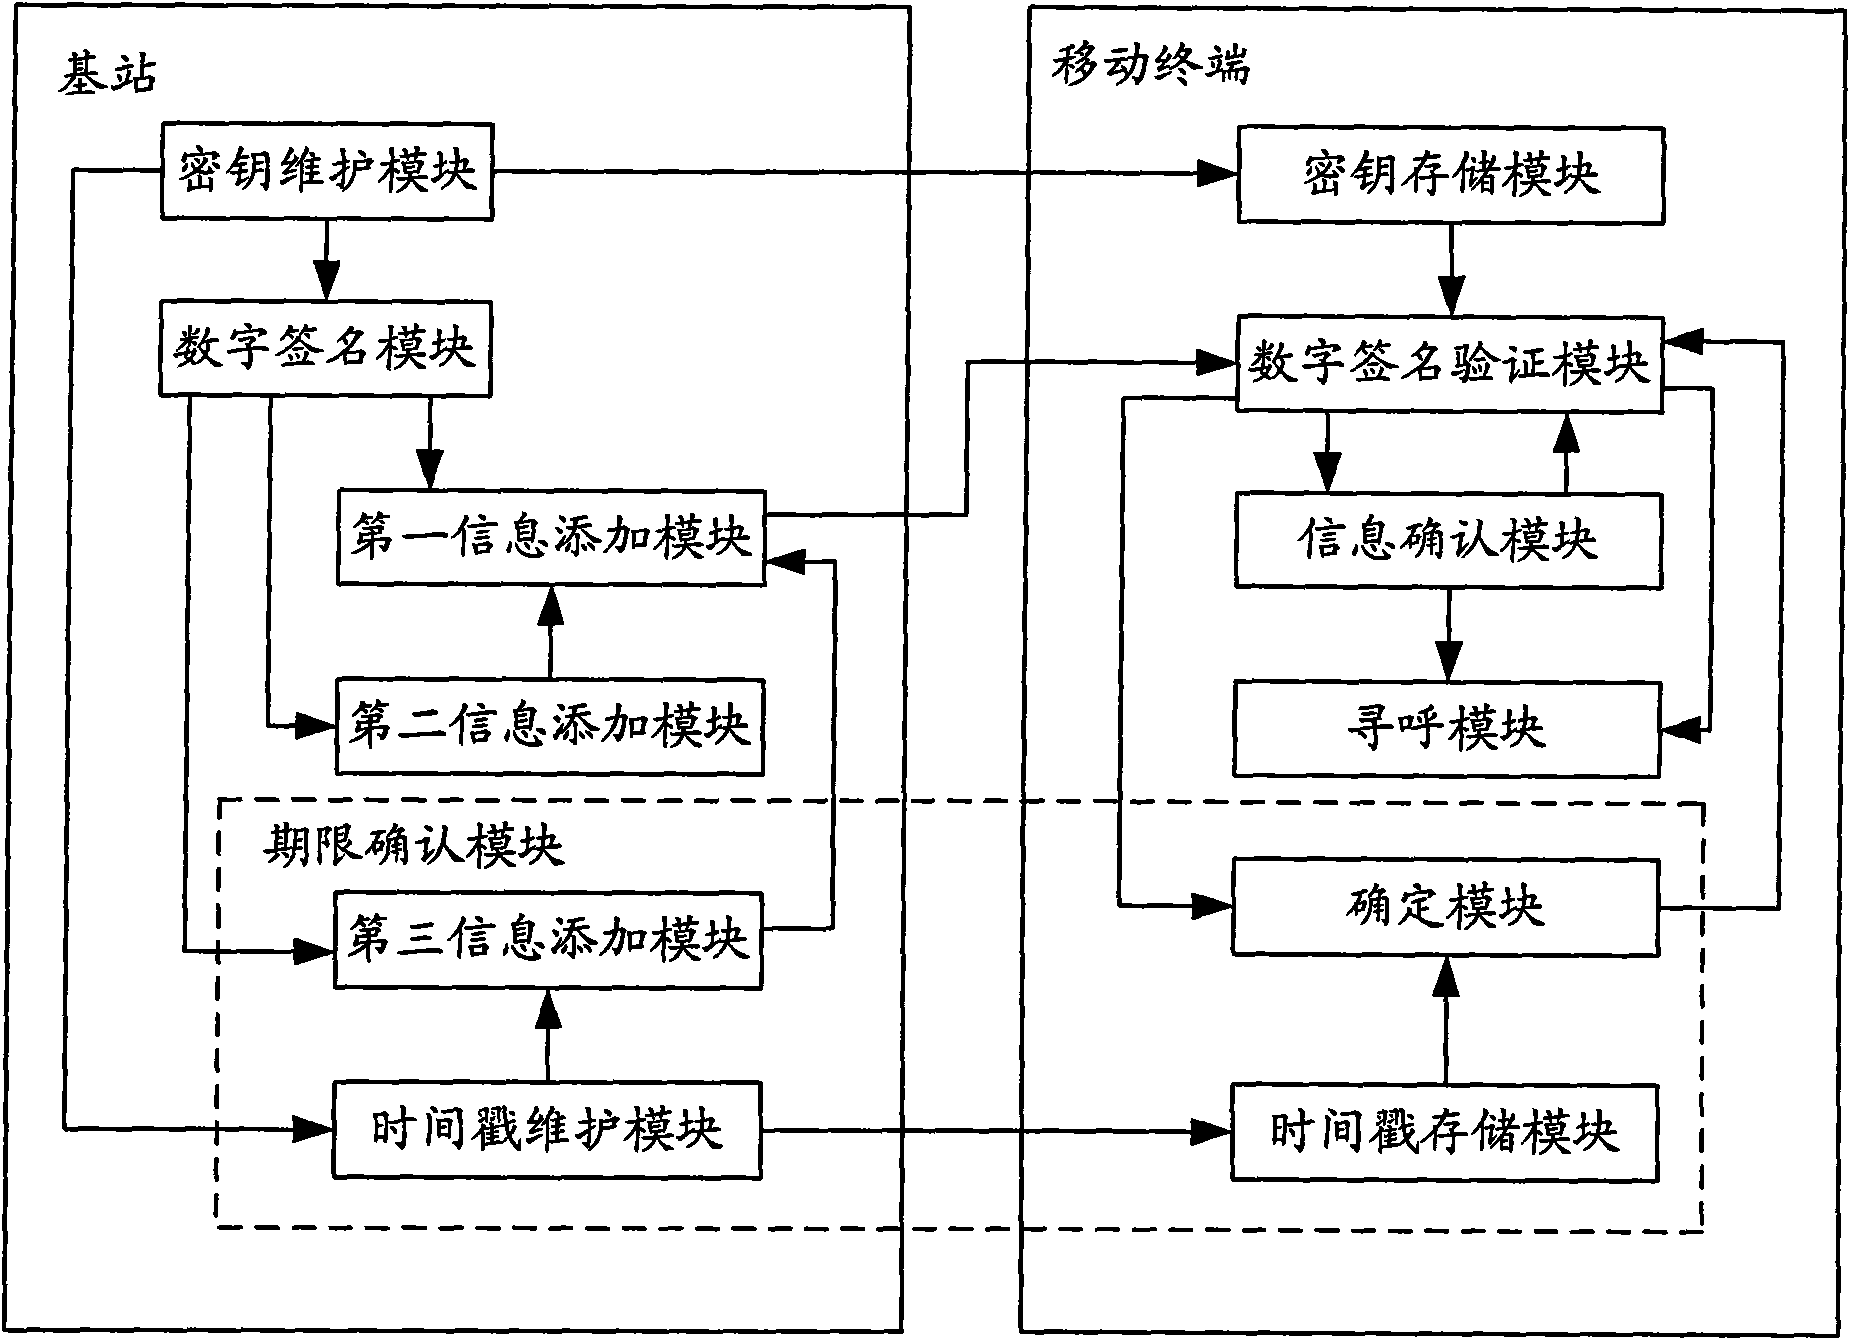 Information issuing method and system for earthquake tsunami alarm system